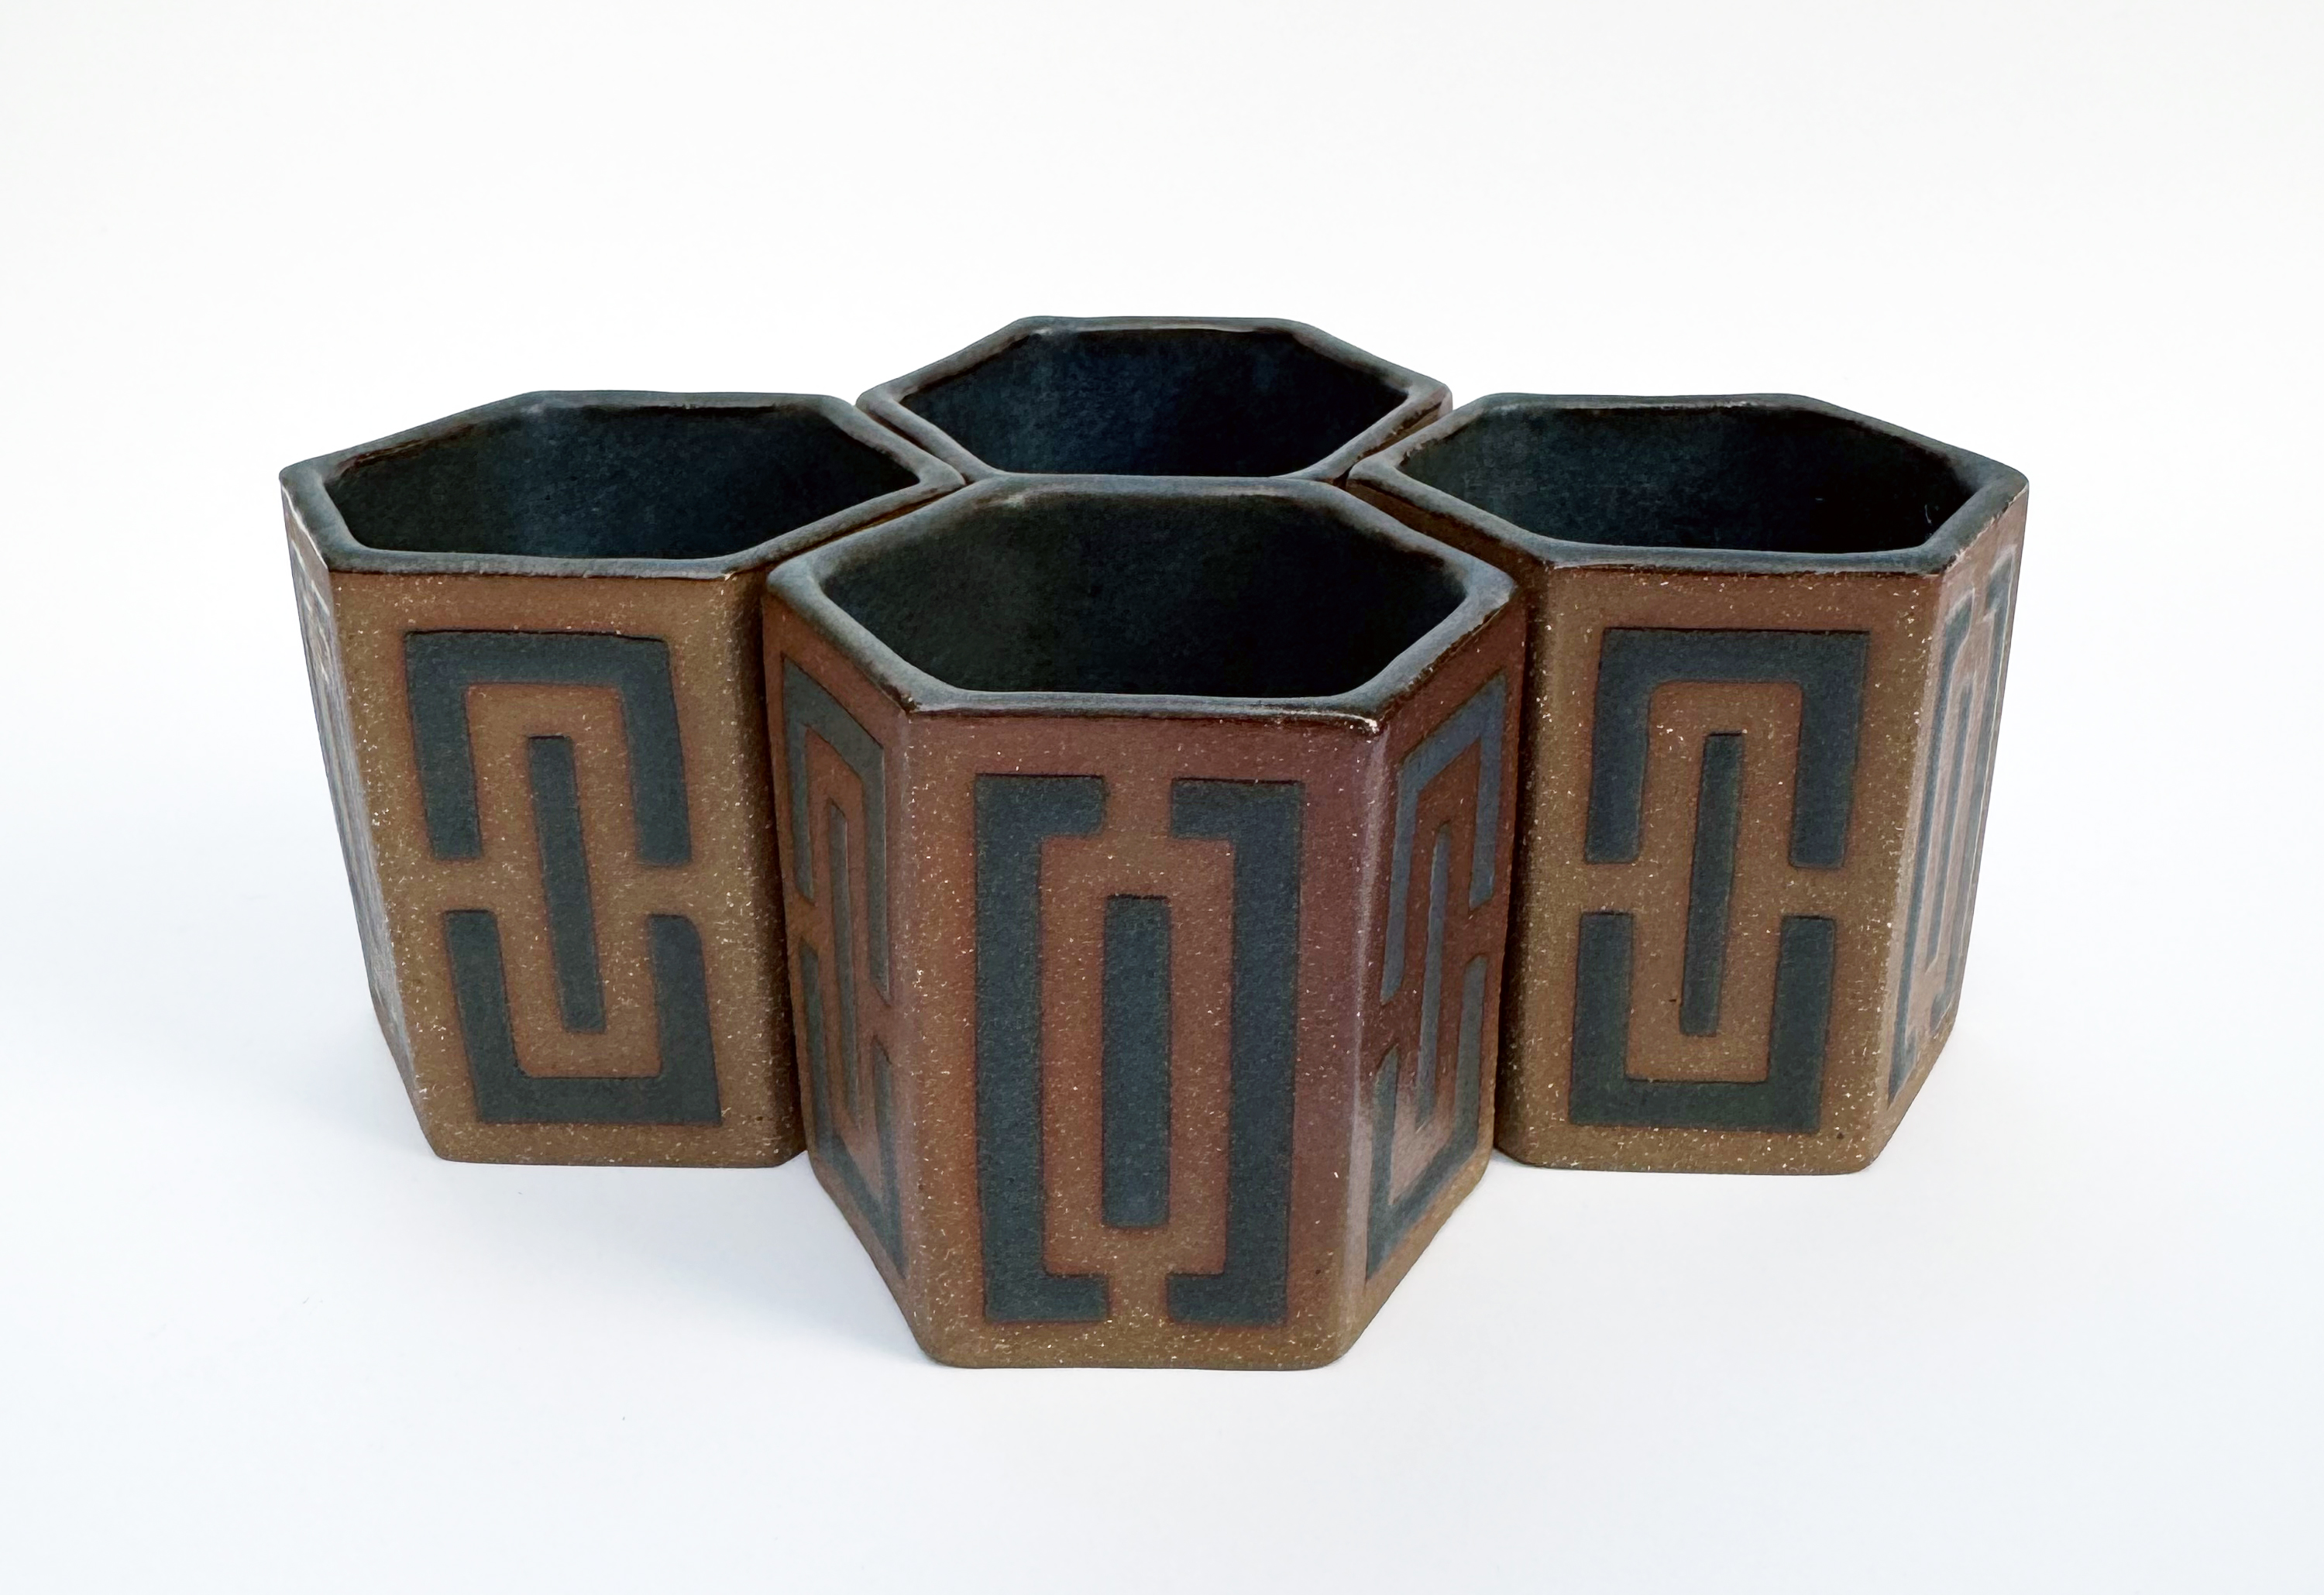 These medium brown stoneware teacups have hexagonal bottoms and openings and six straight sides.